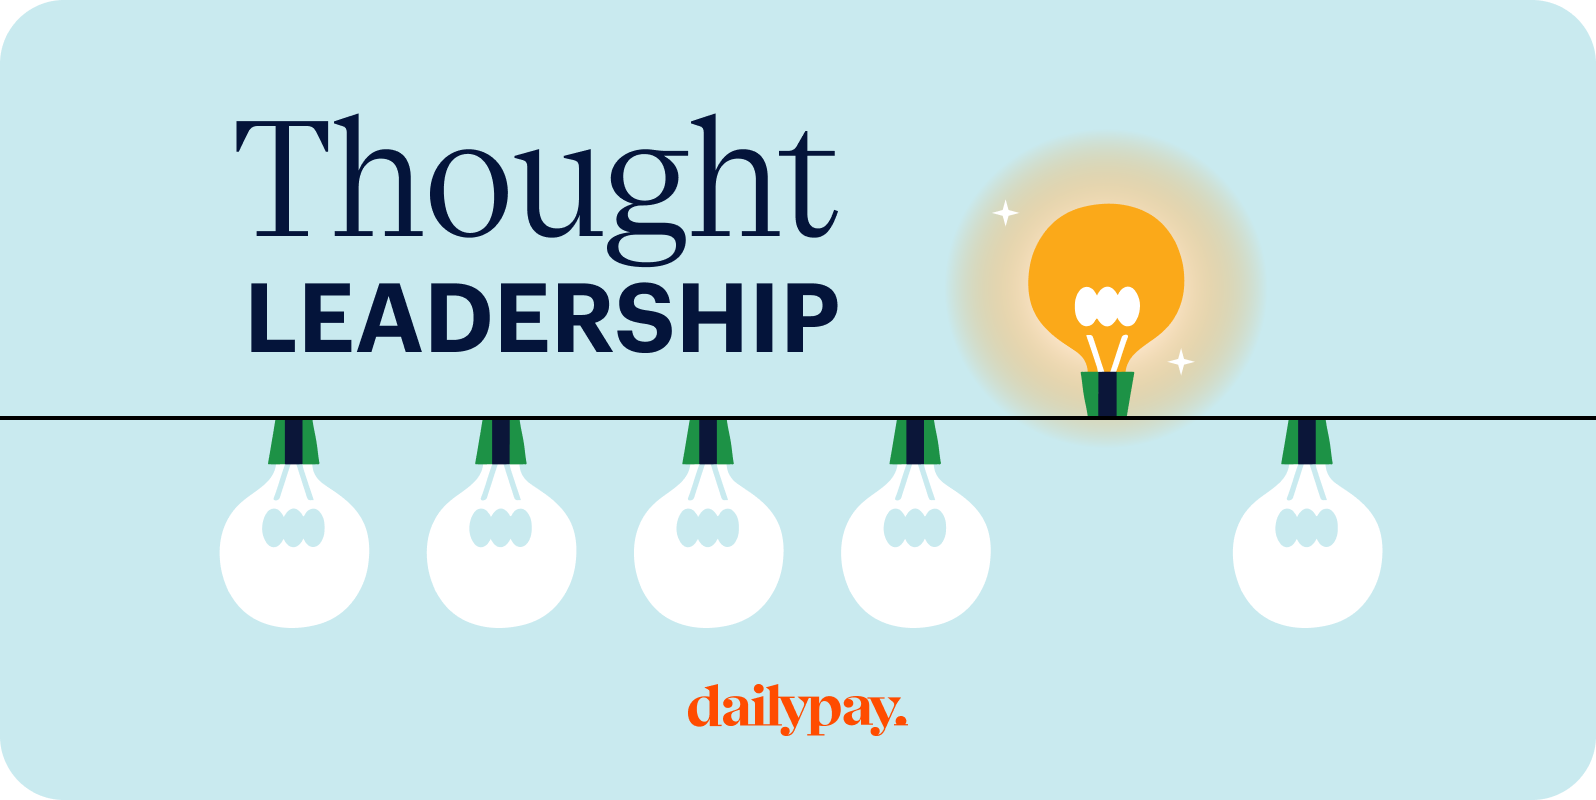 Illustration titled "Thought Leadership" with five light bulbs, one lit among four unlit. "dailypay" logo at the bottom.